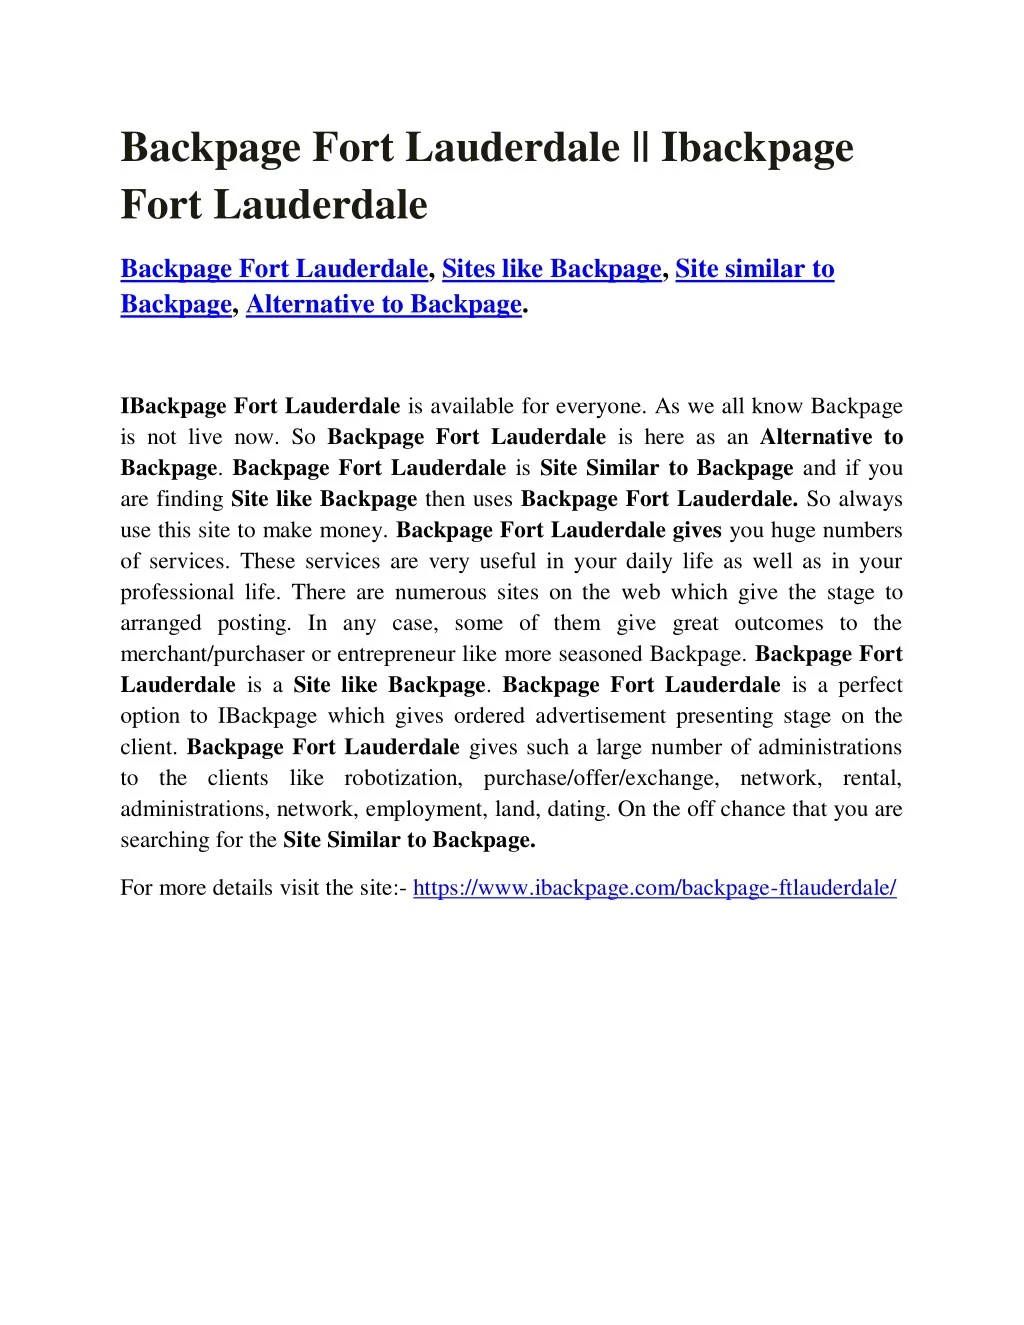 backpage fort lauderdale ibackpage fort lauderdale